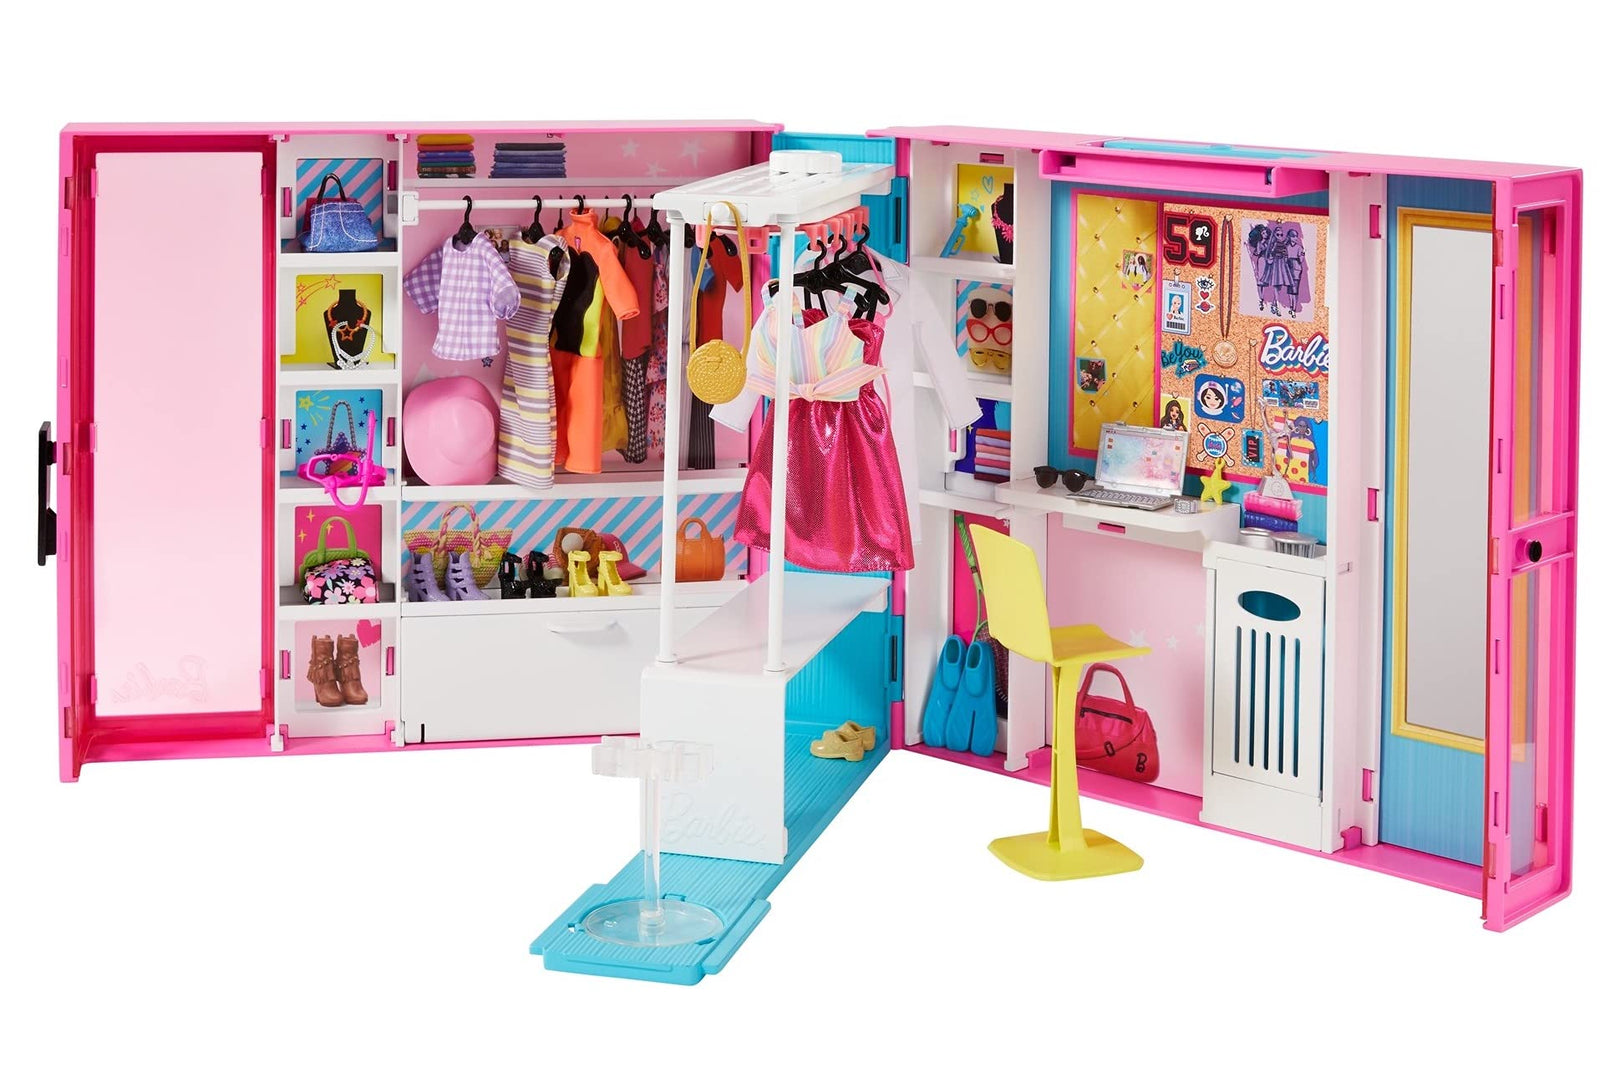 Barbie Dream Closet with 30+ Pieces, Toy Closet, Features 10+ Storage Areas, Full-Length Mirror, Includes 5 Outfits, Gift for Kids 3 to 7 Years Old, Pink